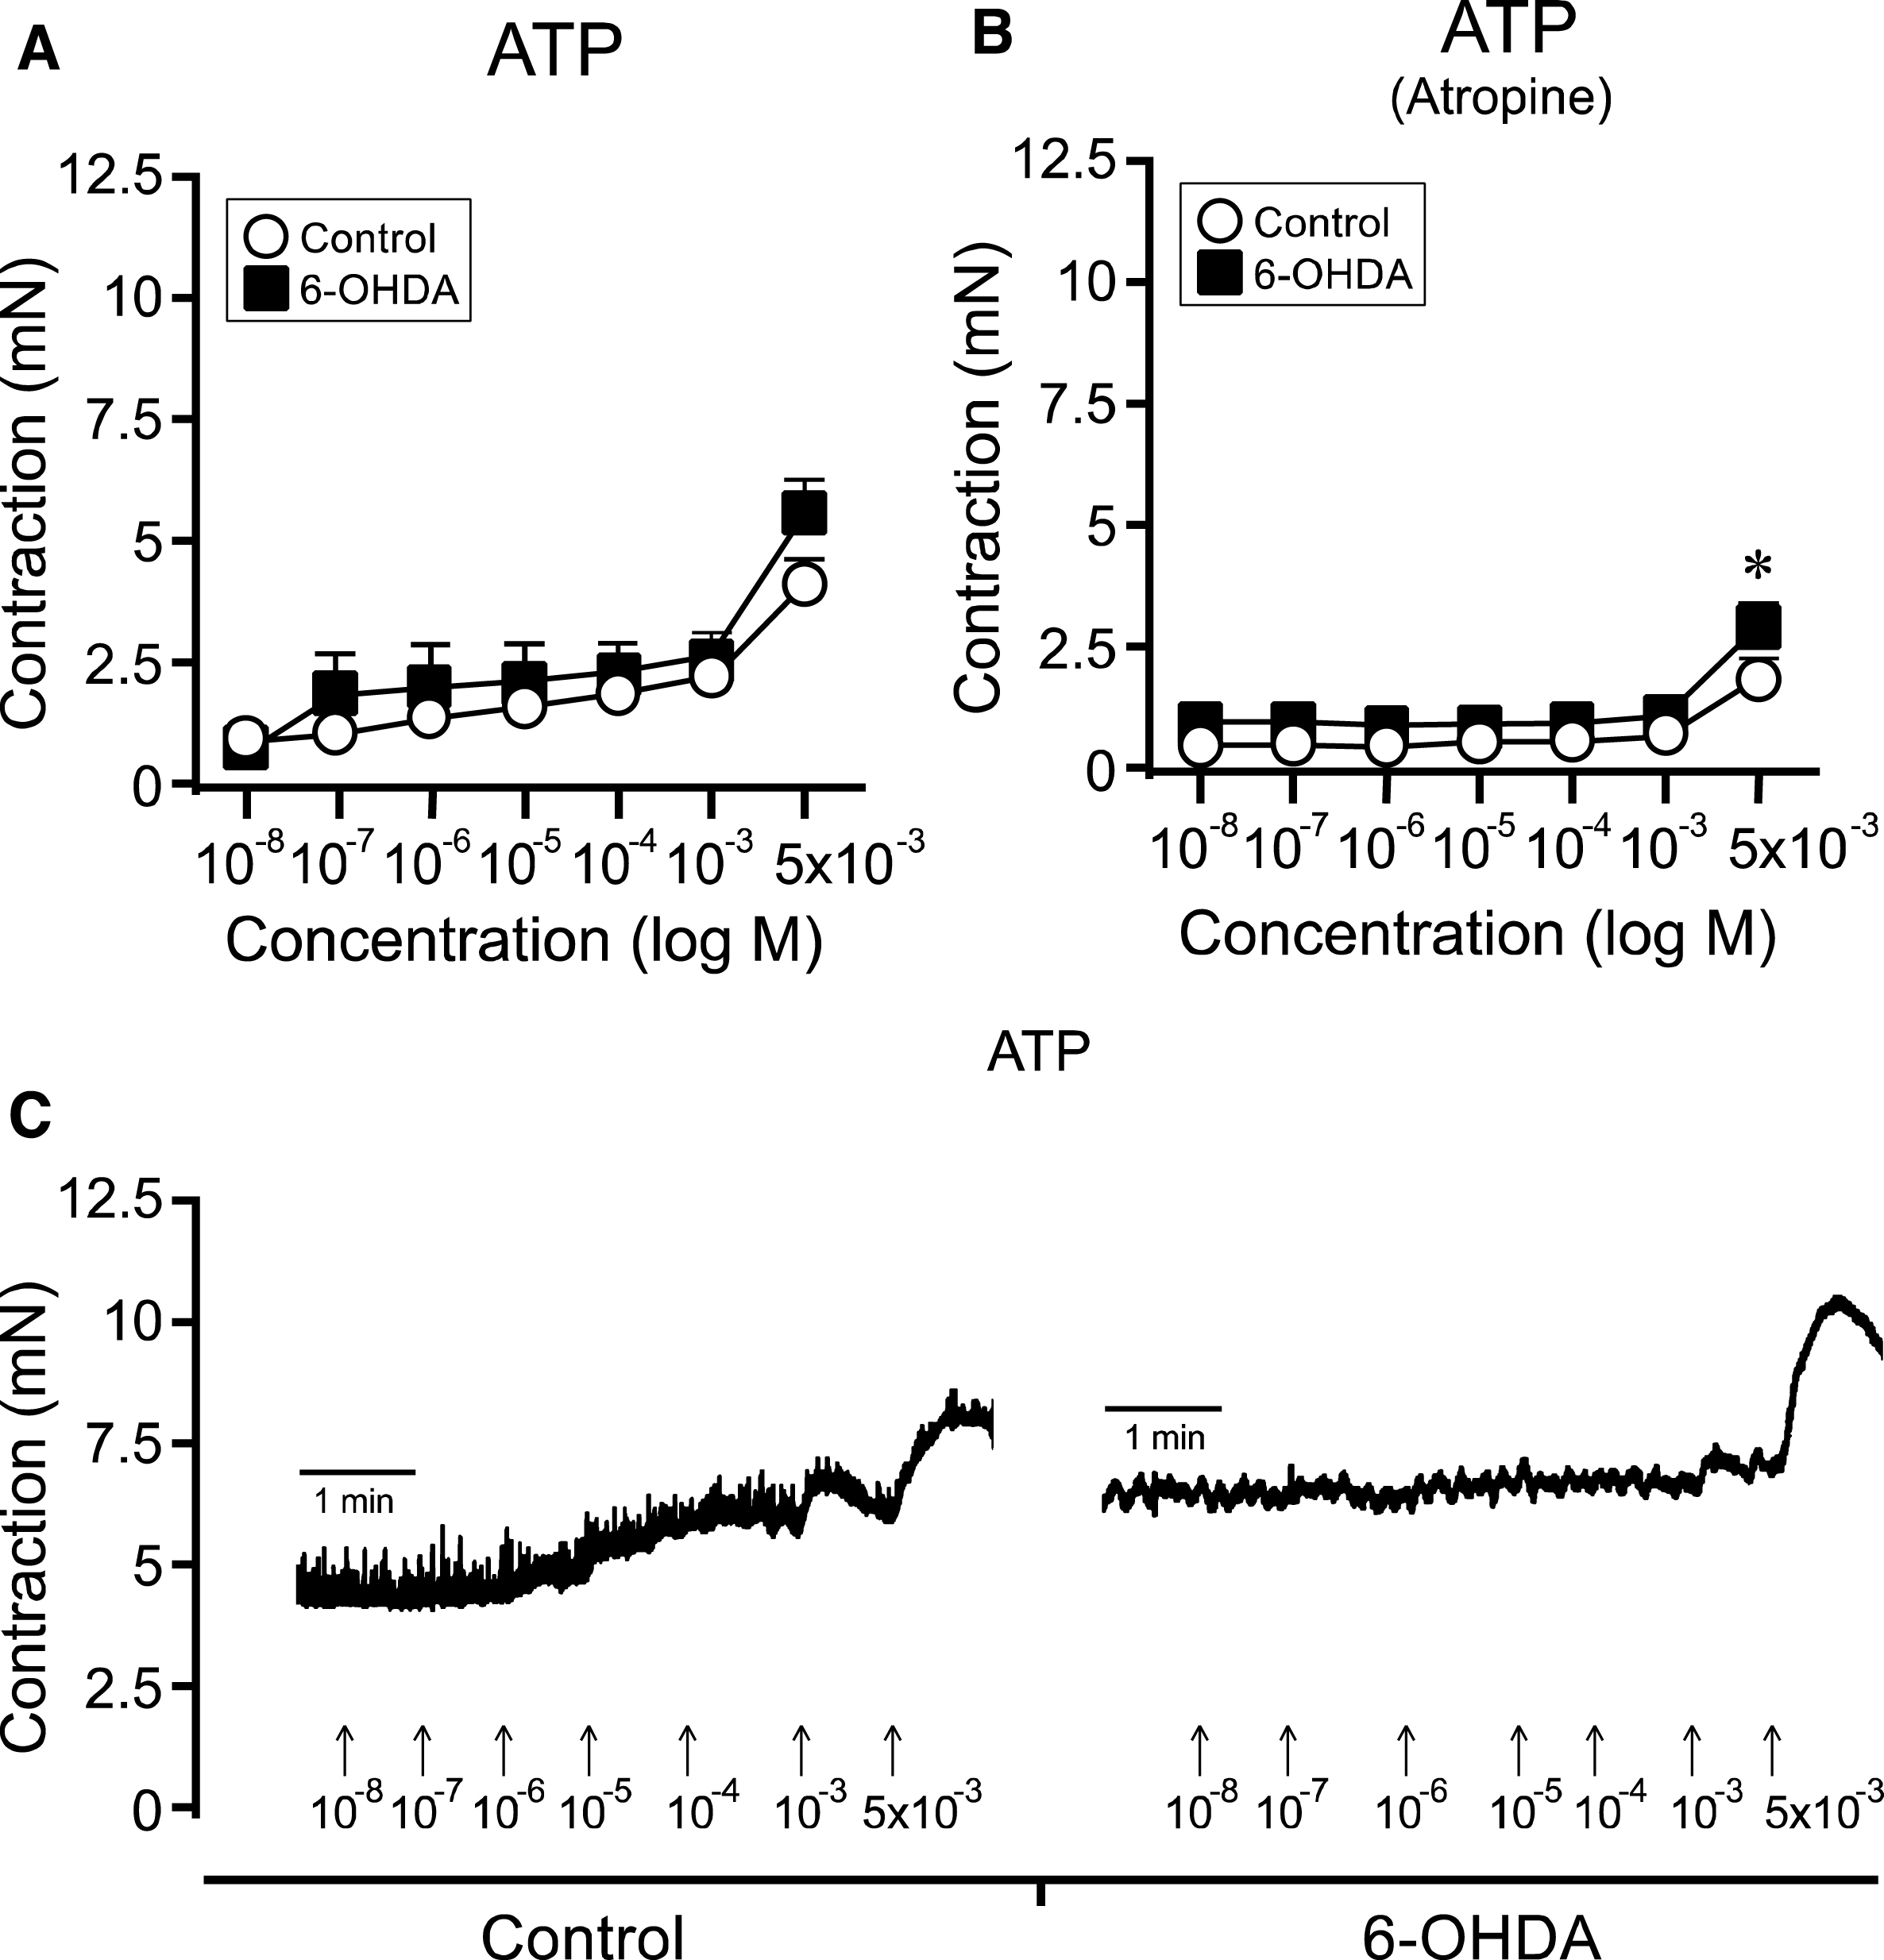 ATP-induced bladder responses in bladder strips from controls and 6-OHDA-lesioned rats. Cumulative administration of ATP showed a trend to yield an overall higher contraction in the 6-OHDA-lesioned rats (n = 10) as compared to controls (n = 27; A). This was evident in particular at the highest concentration (5×10 −
3 M; A, C). A significant difference was observed following atropine administration, where a higher response was shown in the bladder strips from the 6-OHDA-lesioned animals (n = 10) as compared to control animals (n = 26; B).  * = significantly different from control group. [Two-way repeated ANOVAs; (A) interaction: F(6, 210) = 1.69, p = 0.12, (B) interaction: F(6, 204) = 1.85, p = 0.092, Group: F(1, 34) = 8.40, p = 0.0065; All ANOVAS are followed by a Bonferroni multiple comparison test].